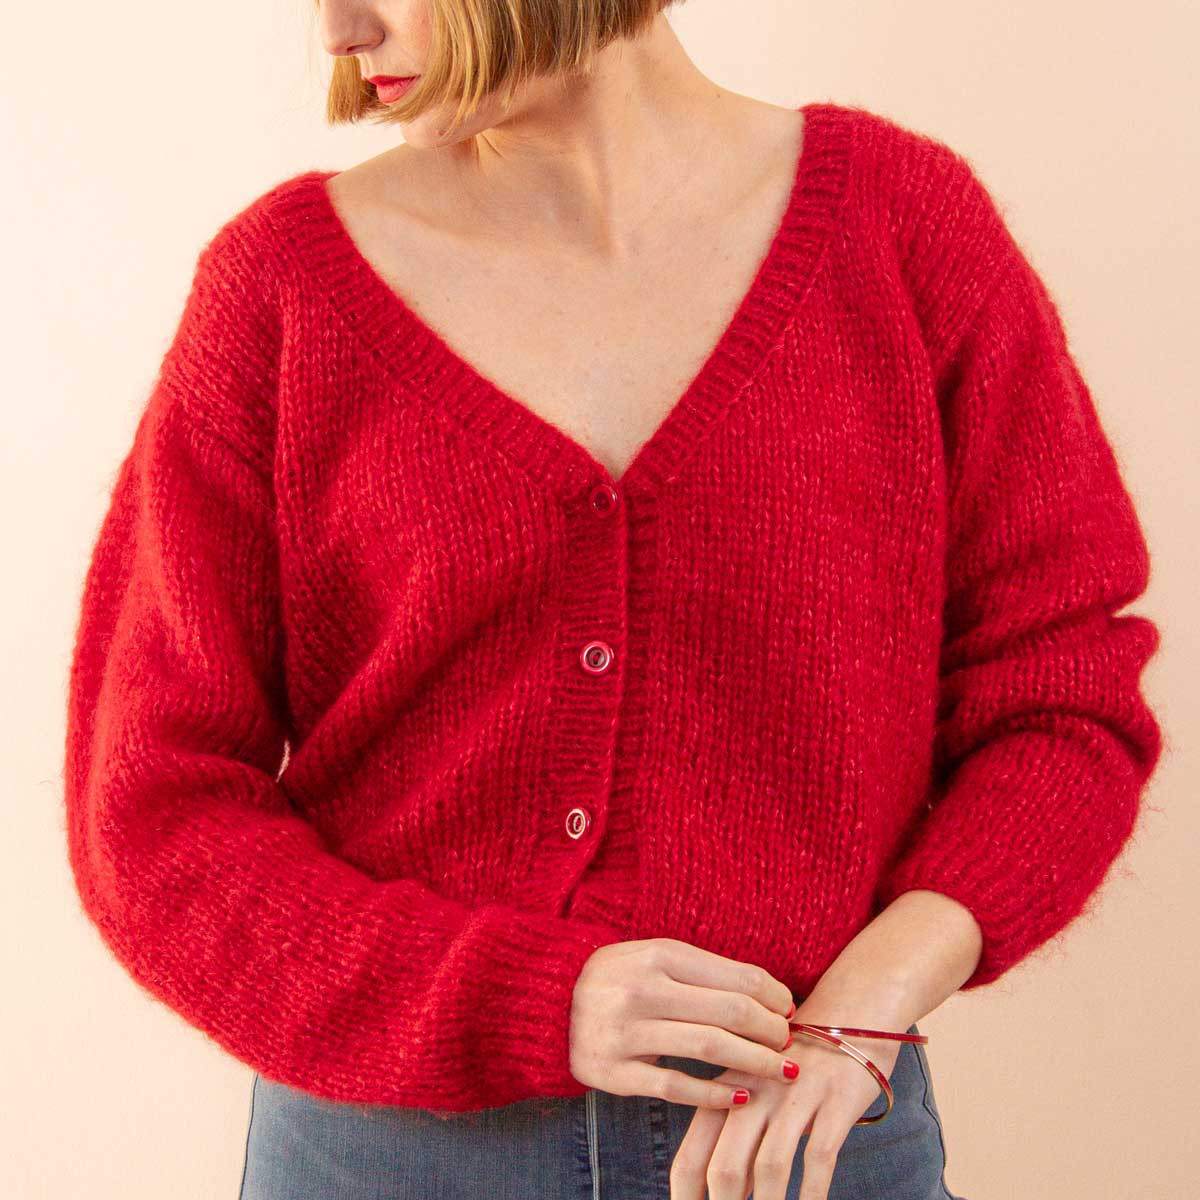 Lucine Cardigan to knit